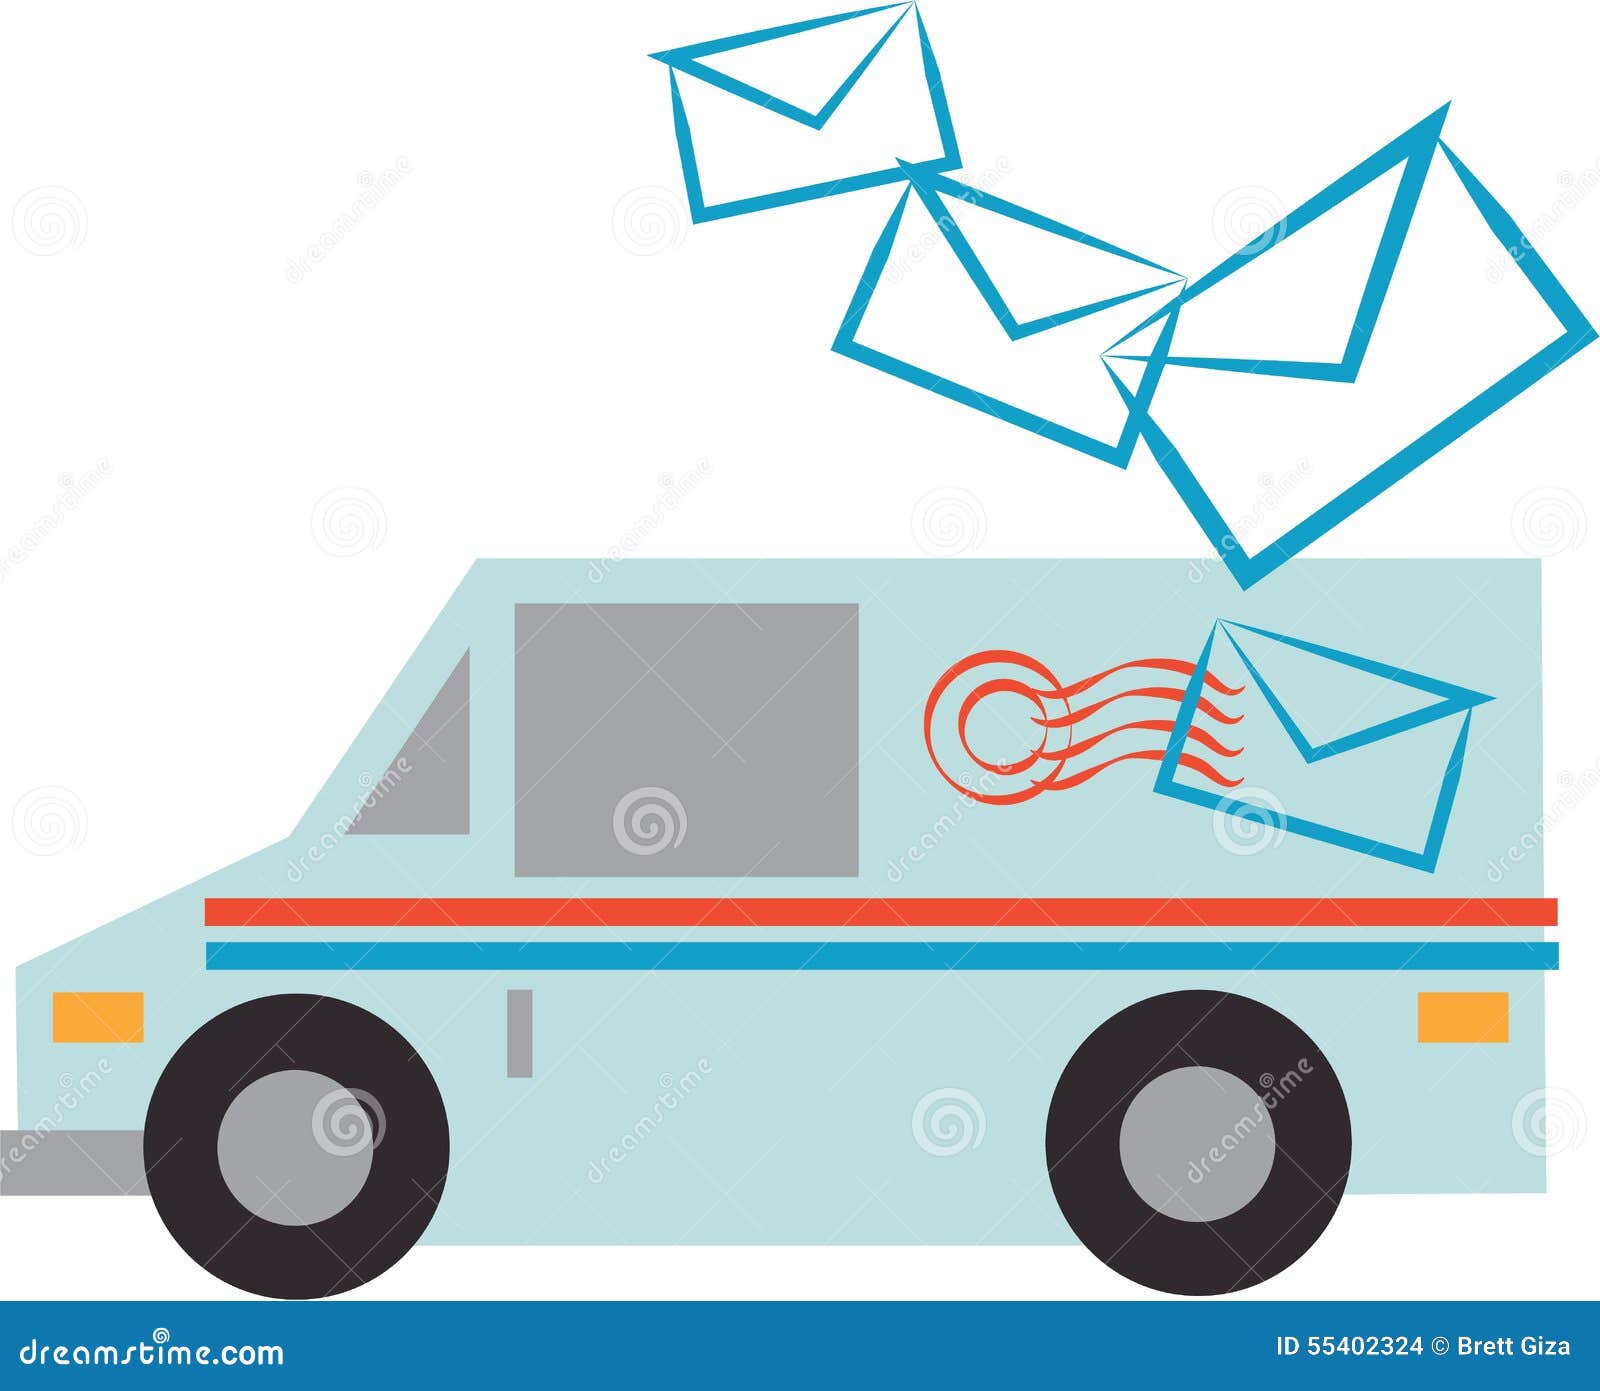 mail delivery clipart free - photo #38